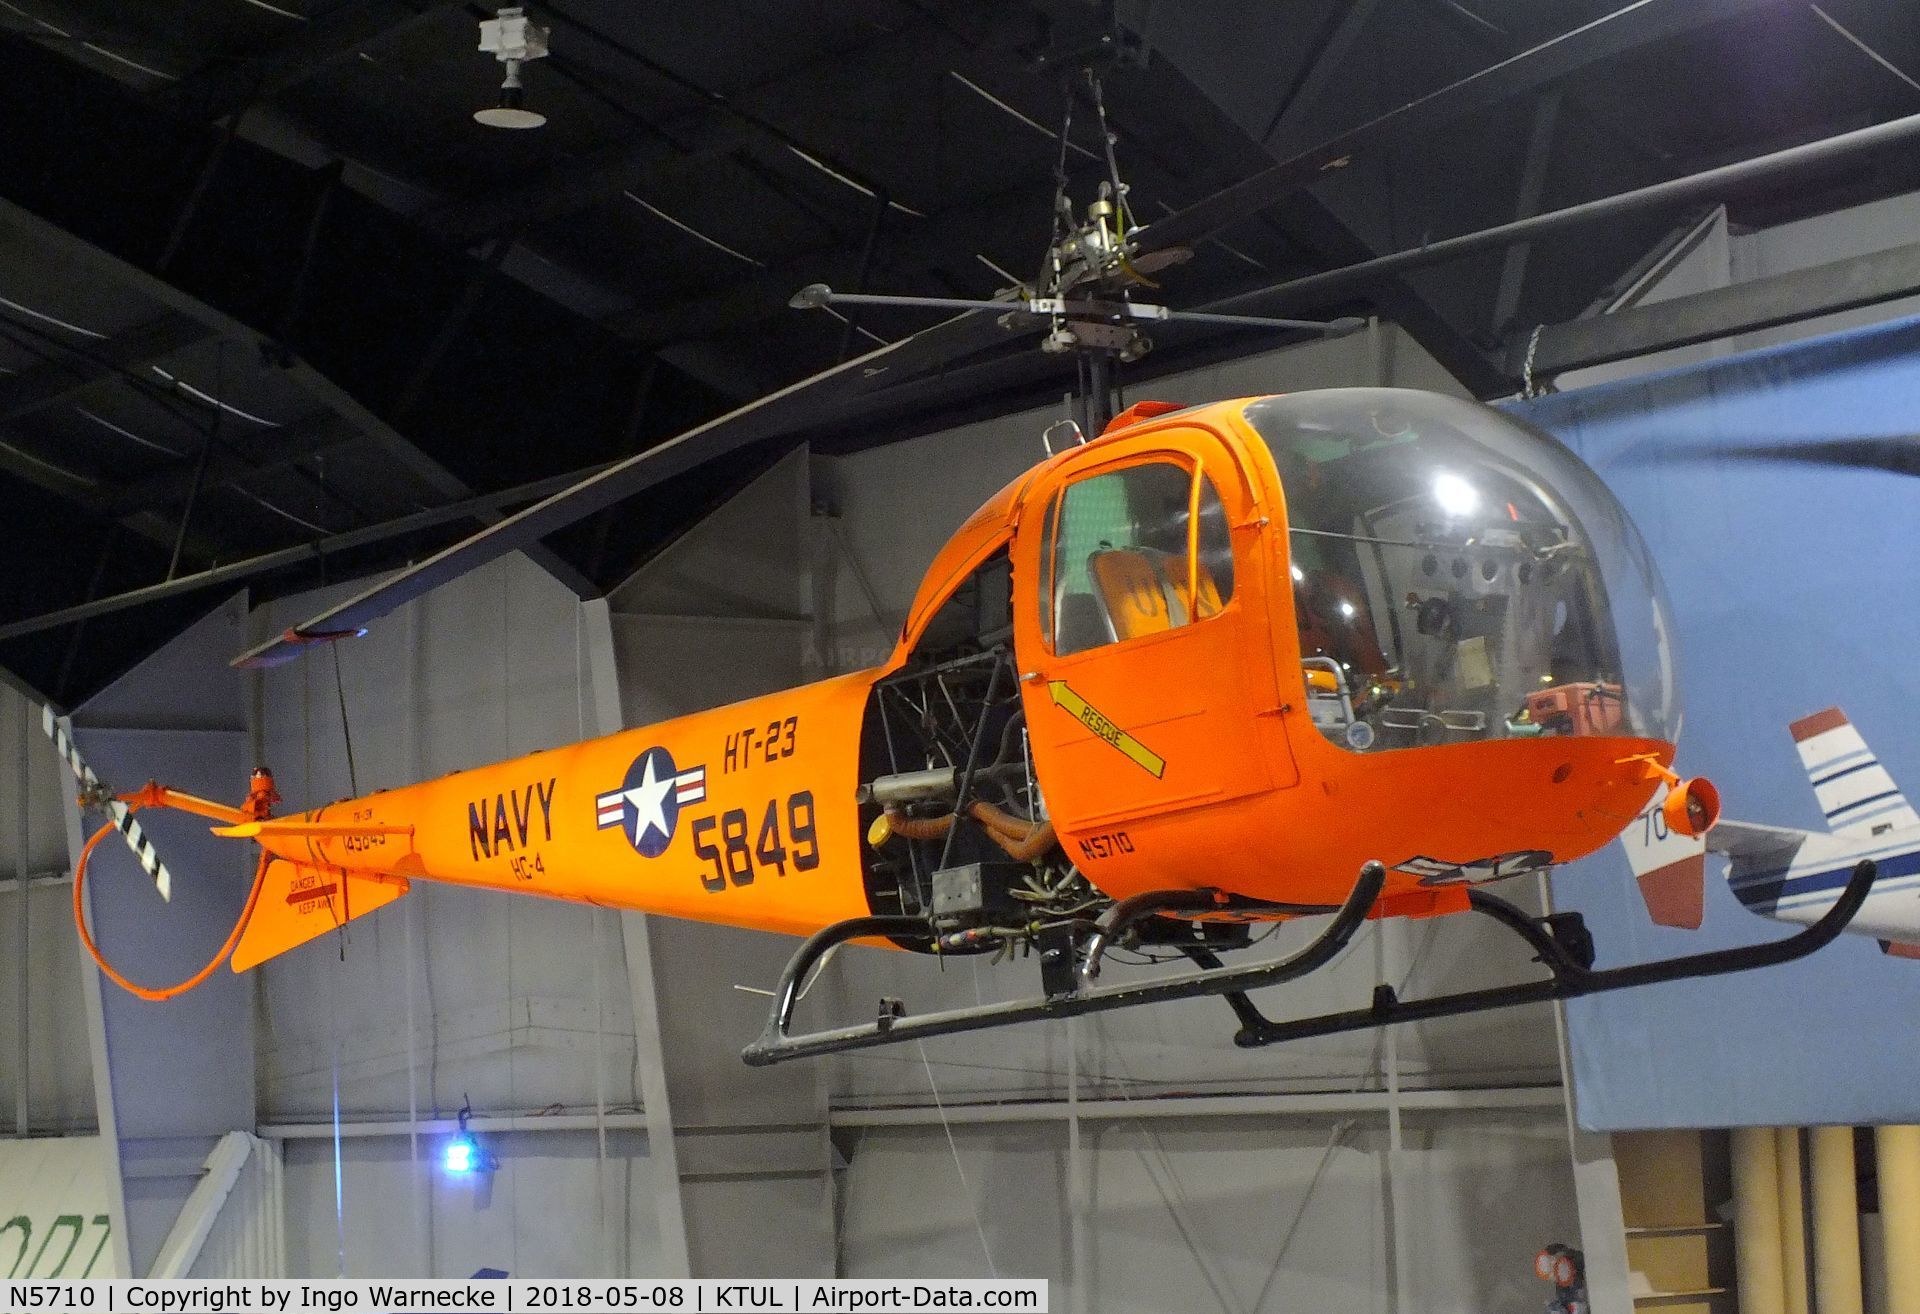 N5710, 1958 Bell 47K C/N 2216, Bell 47K Ranger (HTL-7) at the Tulsa Air and Space Museum, Tulsa OK